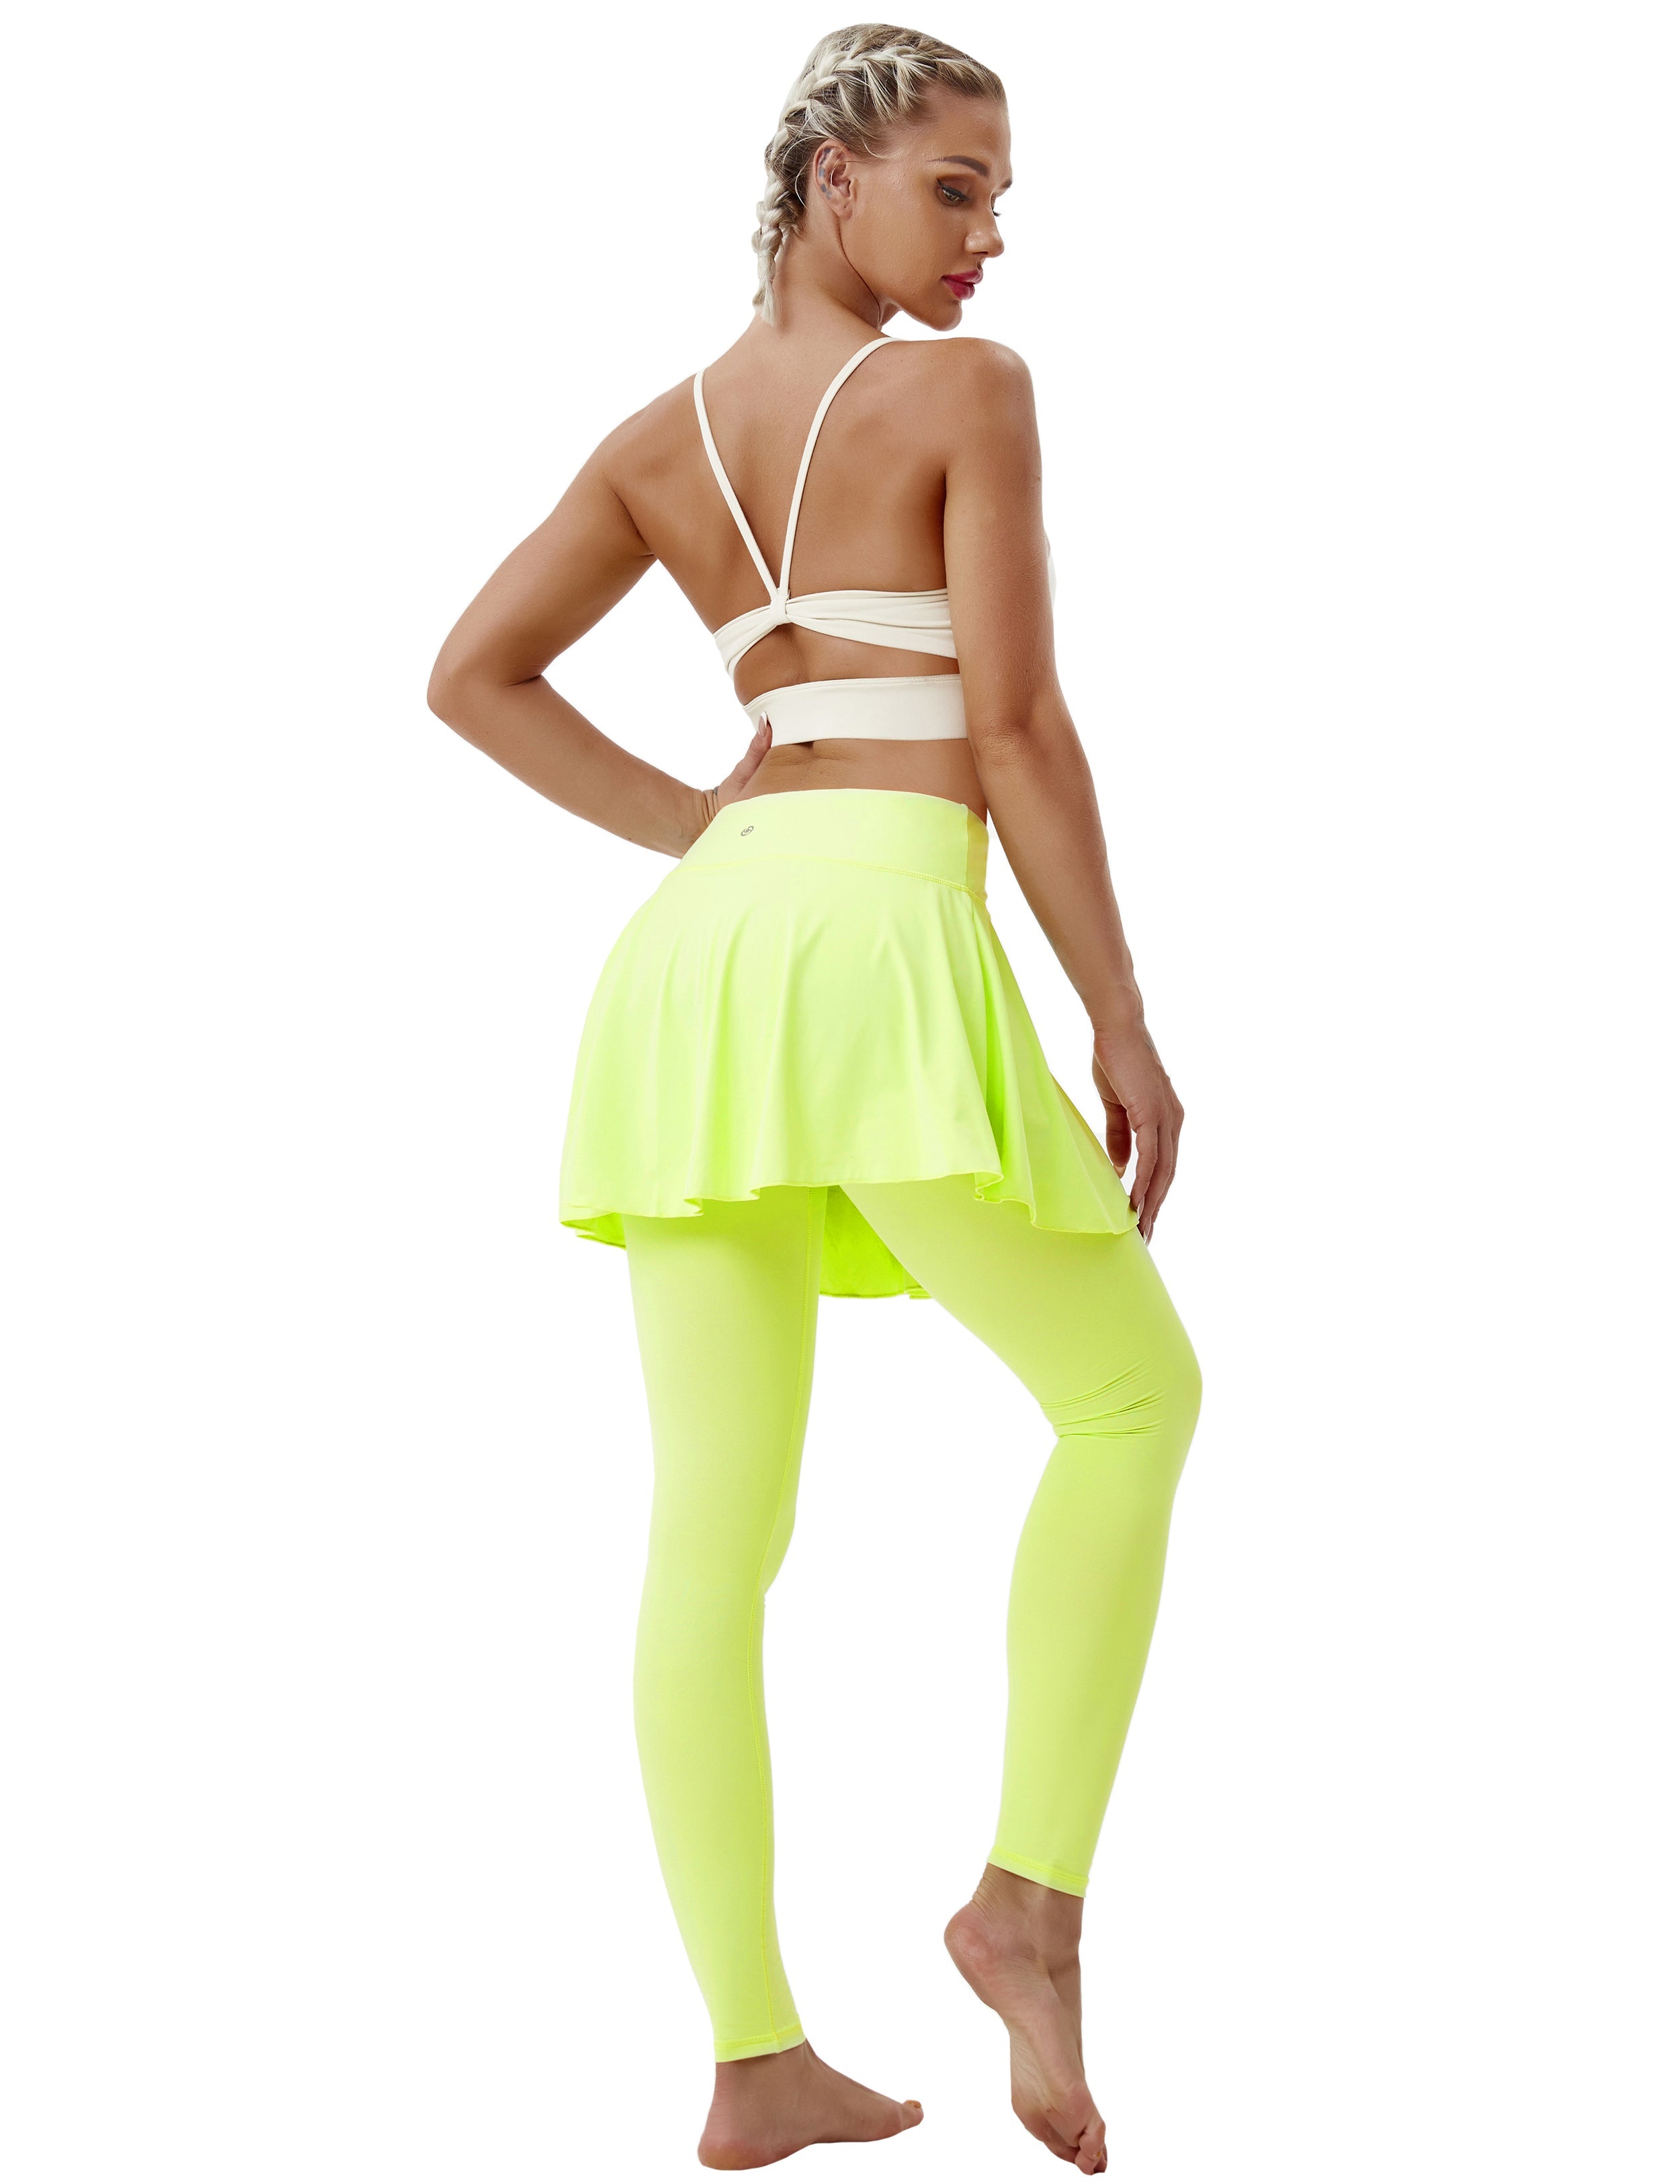 Athletic Tennis Golf Skort with Pocket Shorts neonyellow 80%Nylon/20%Spandex UPF 50+ sun protection Elastic closure Lightweight, Wrinkle Moisture wicking Quick drying Secure & comfortable two layer Hidden pocket